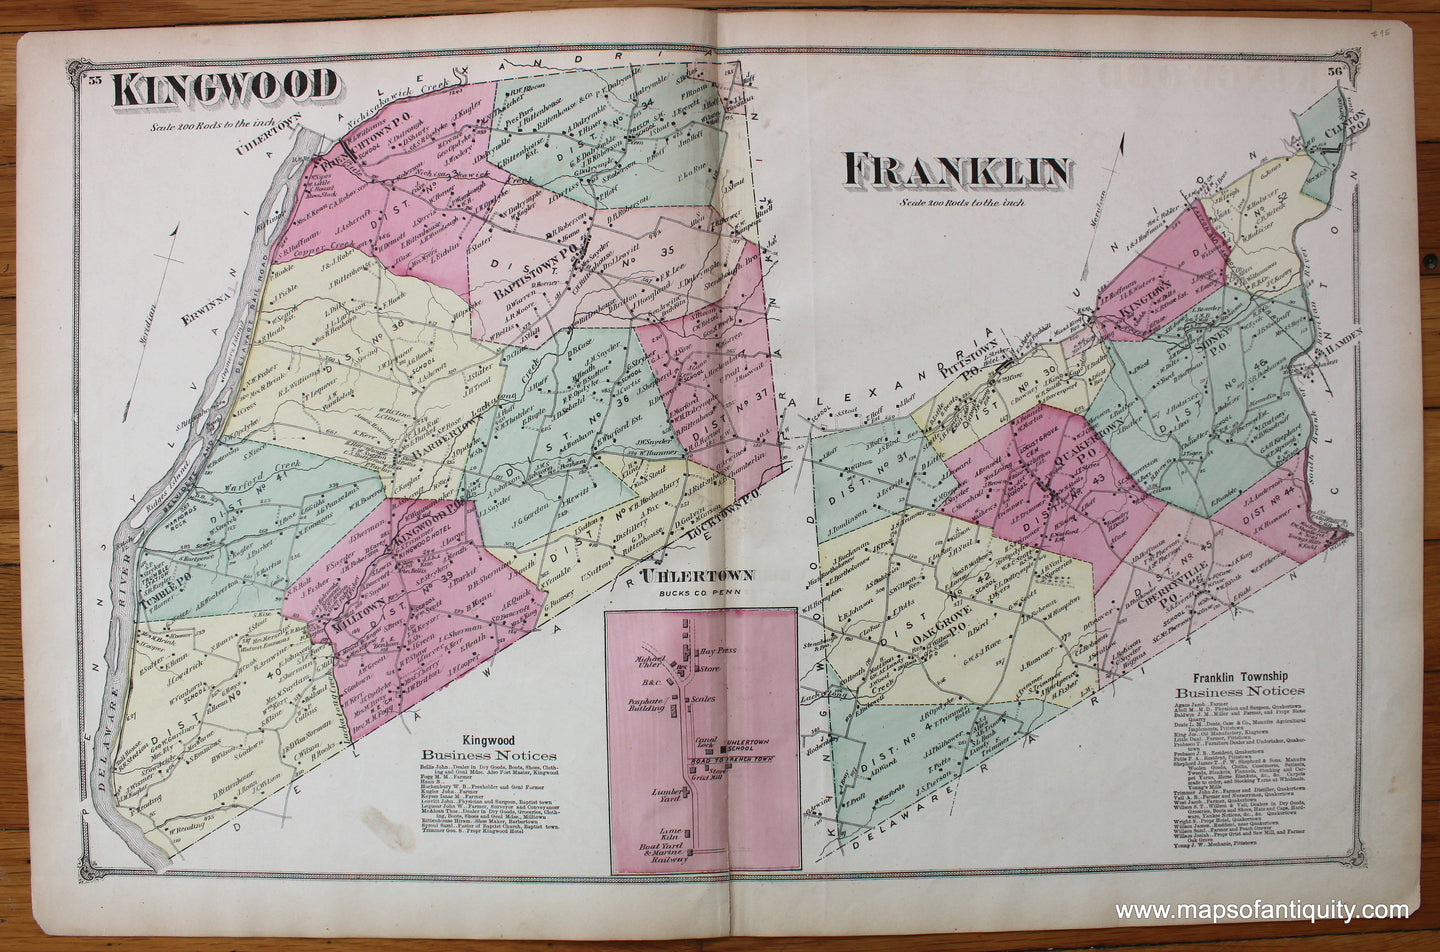 Antique-Hand-Colored-Map-Kingwood-Franklin-New-Jersey-1872-F.W.-Beers-New-Jersey-1800s-19th-century-Maps-of-Antiquity